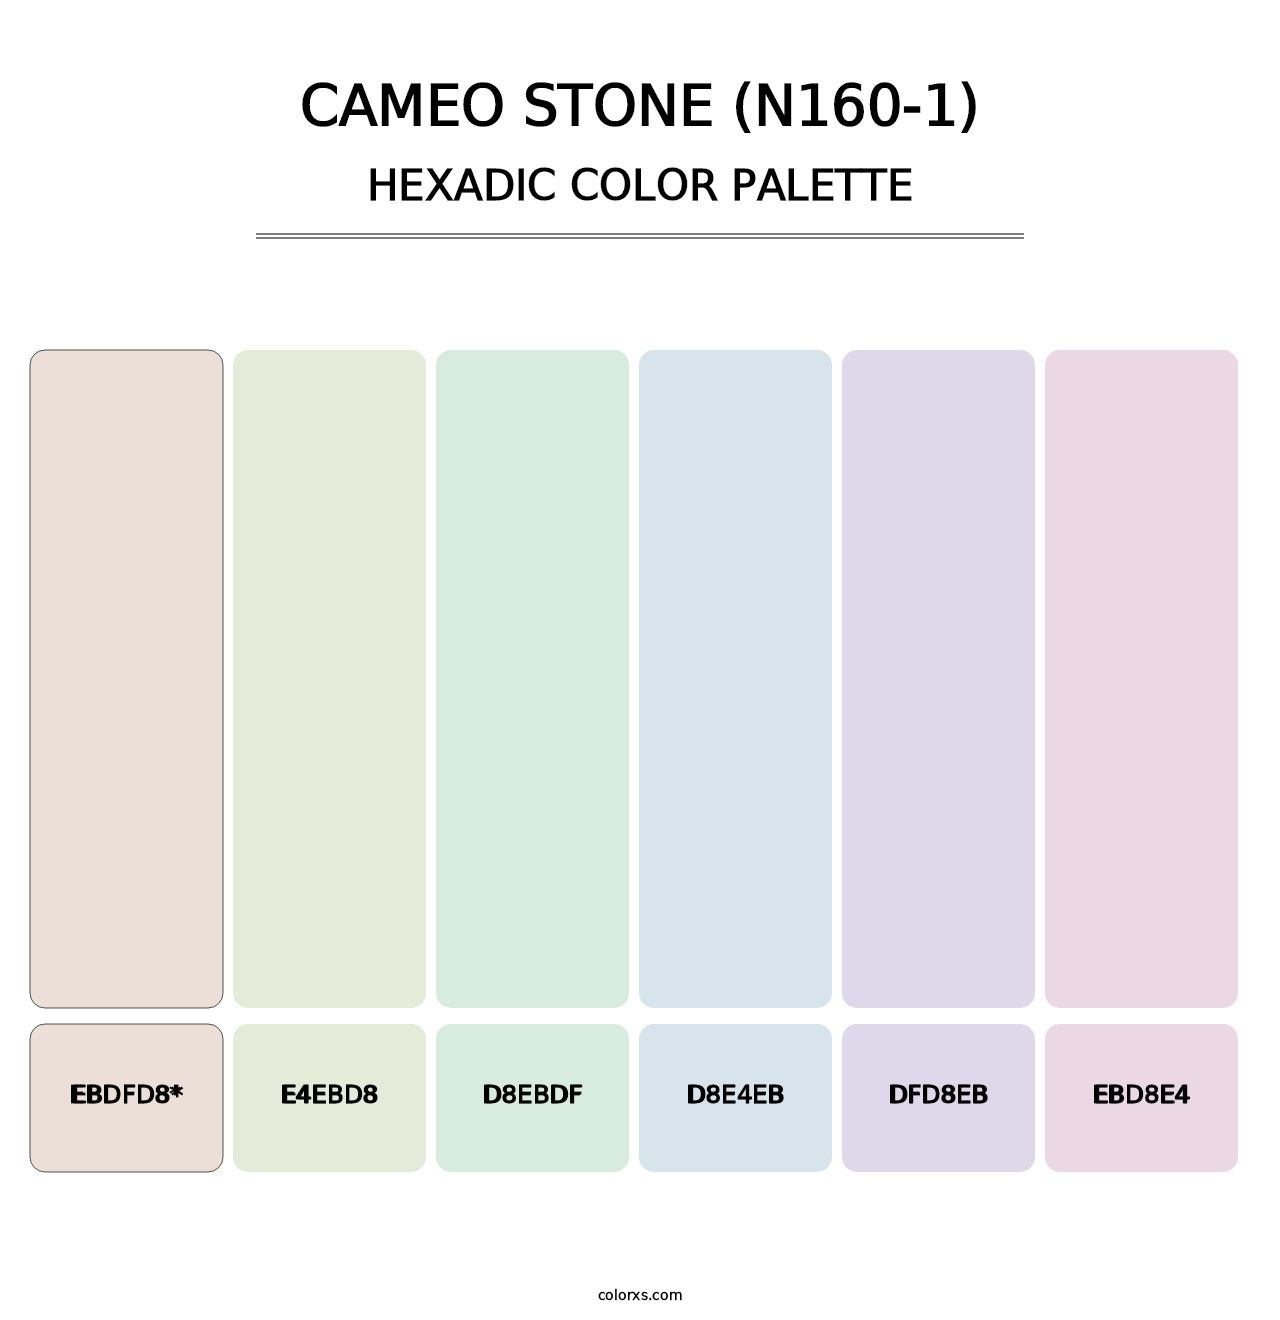 Cameo Stone (N160-1) - Hexadic Color Palette